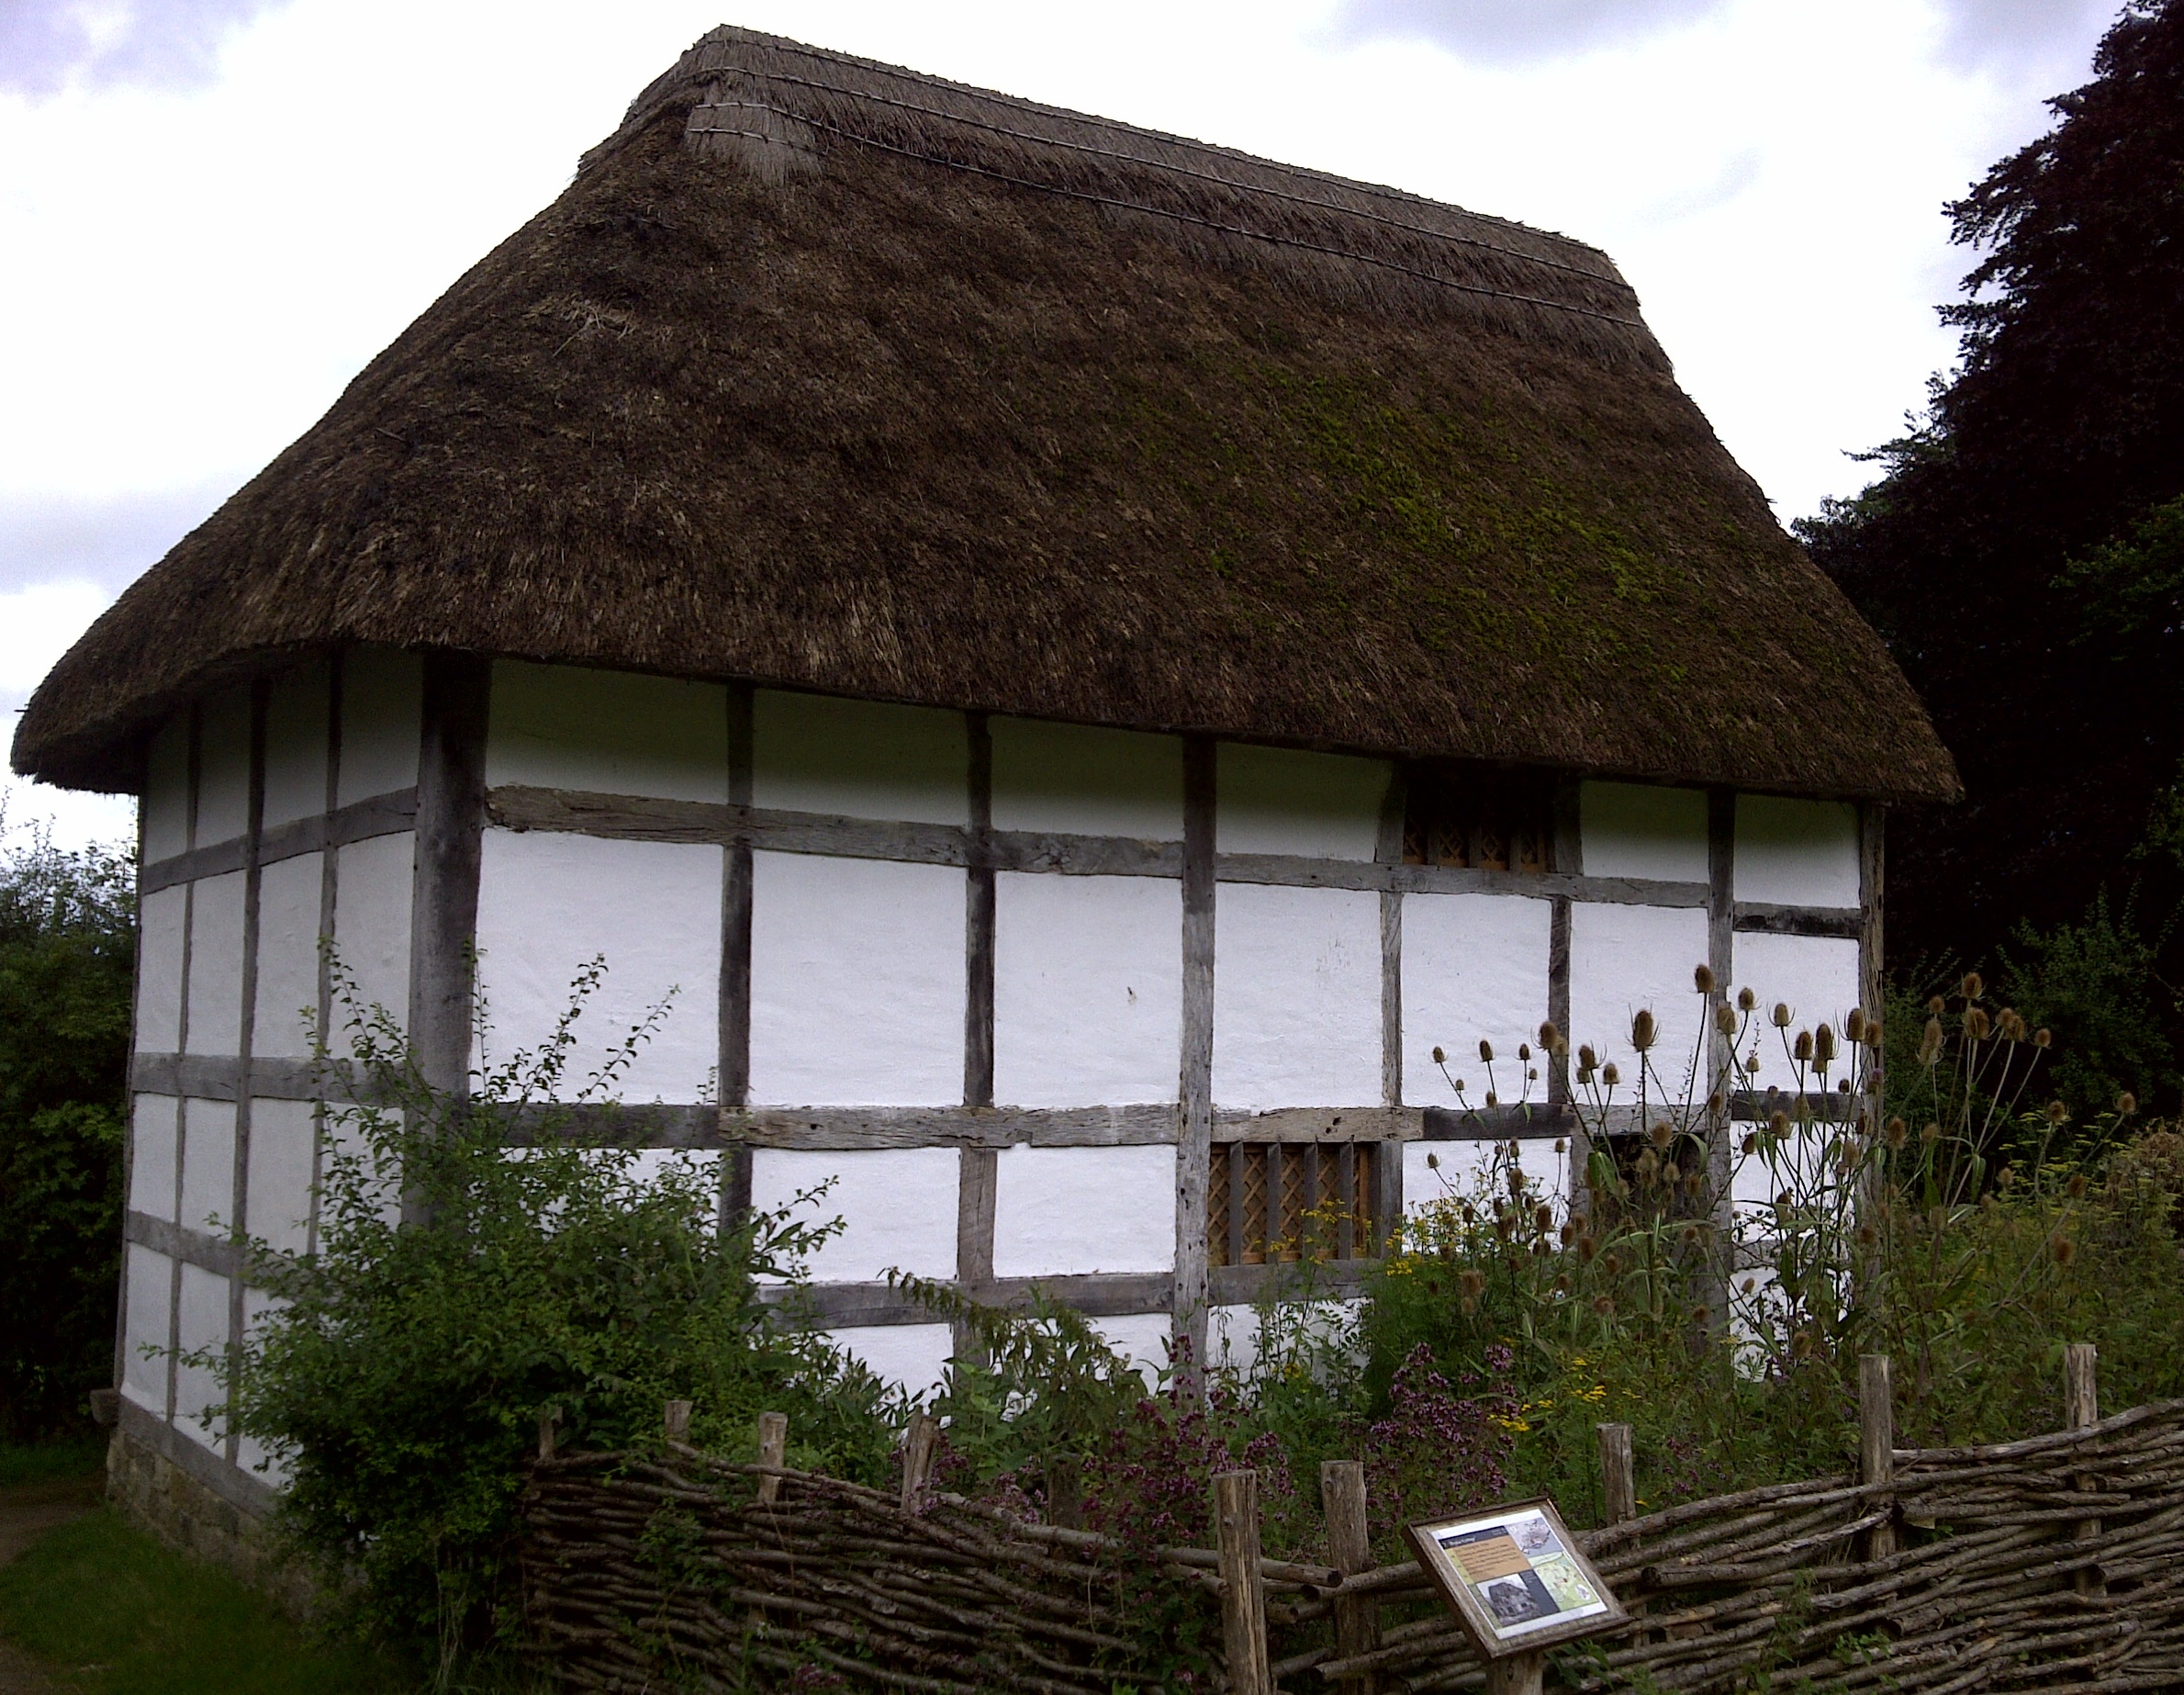 Medieval open hall at Weald and Downland Museum